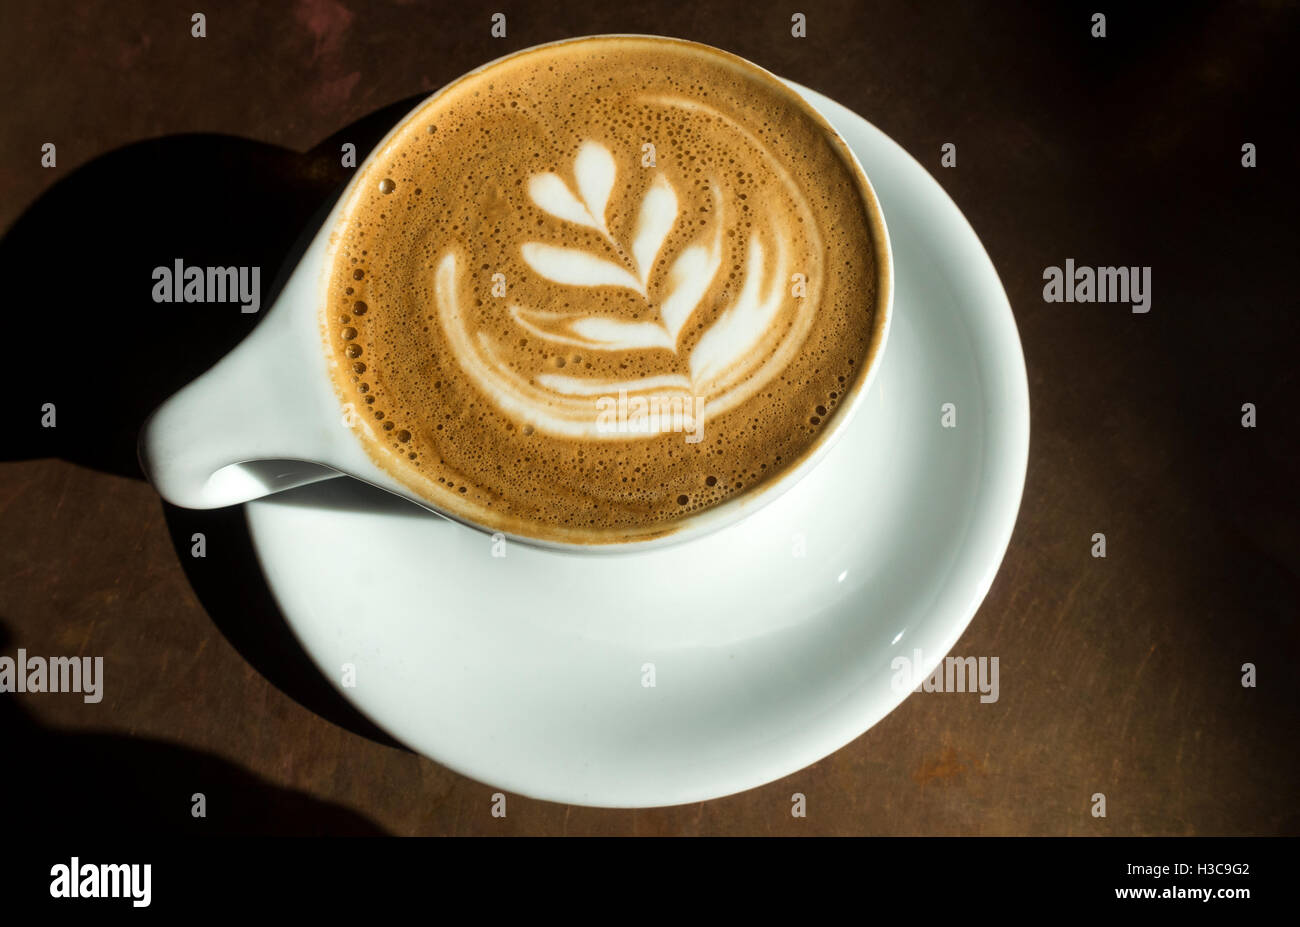 Cappuccino in a white cup with a fern leaf illustration in the foam Stock Photo